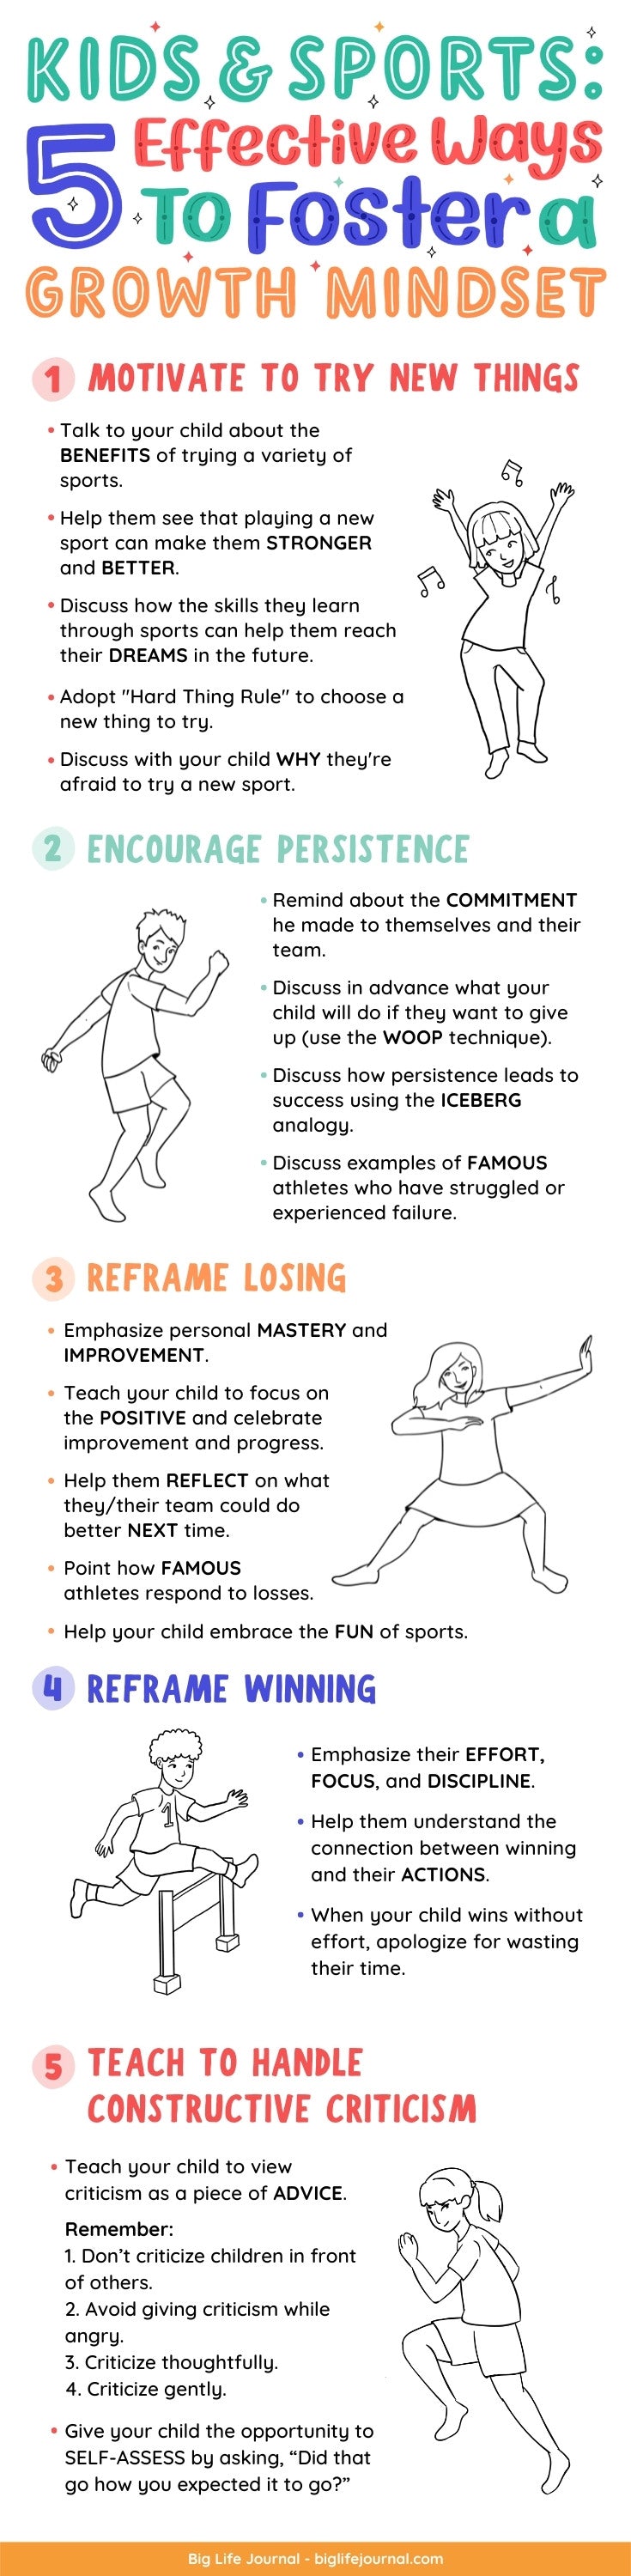 Kids and Sports: 5 Effective Ways to Foster a Growth Mindset